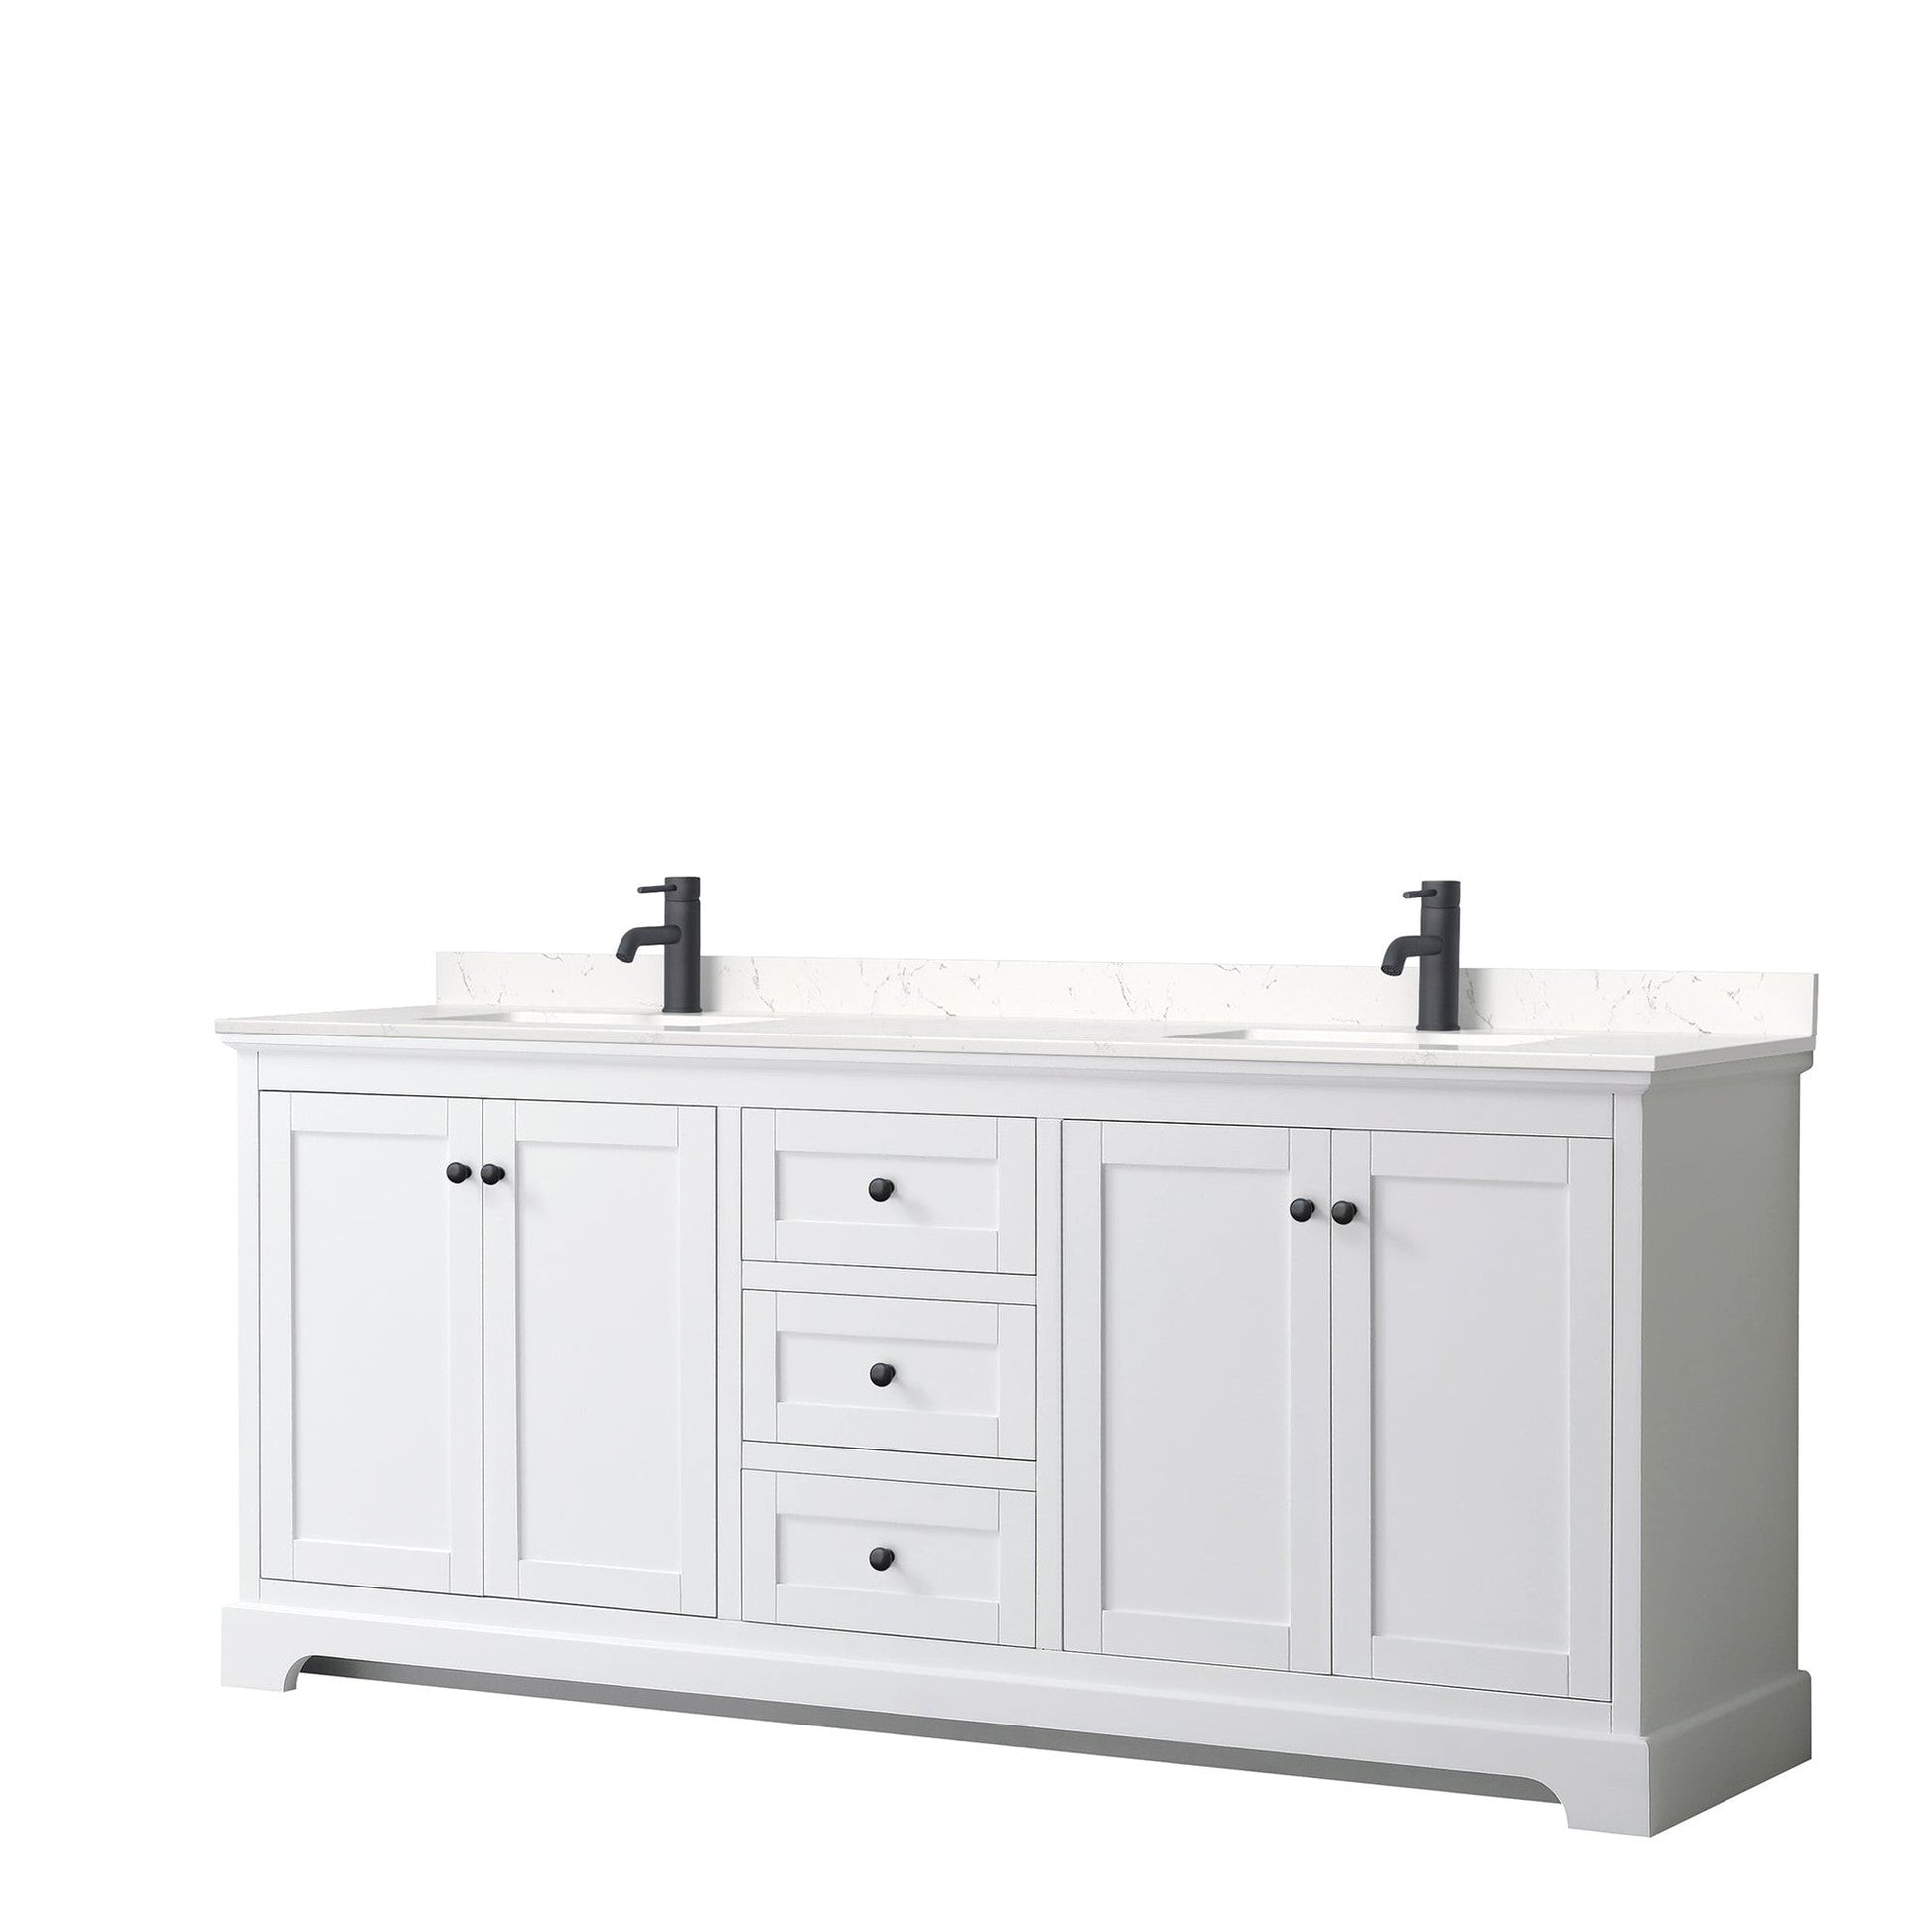 Avery 80" Double Bathroom Vanity in White, Carrara Cultured Marble Countertop, Undermount Square Sinks, Matte Black Trim